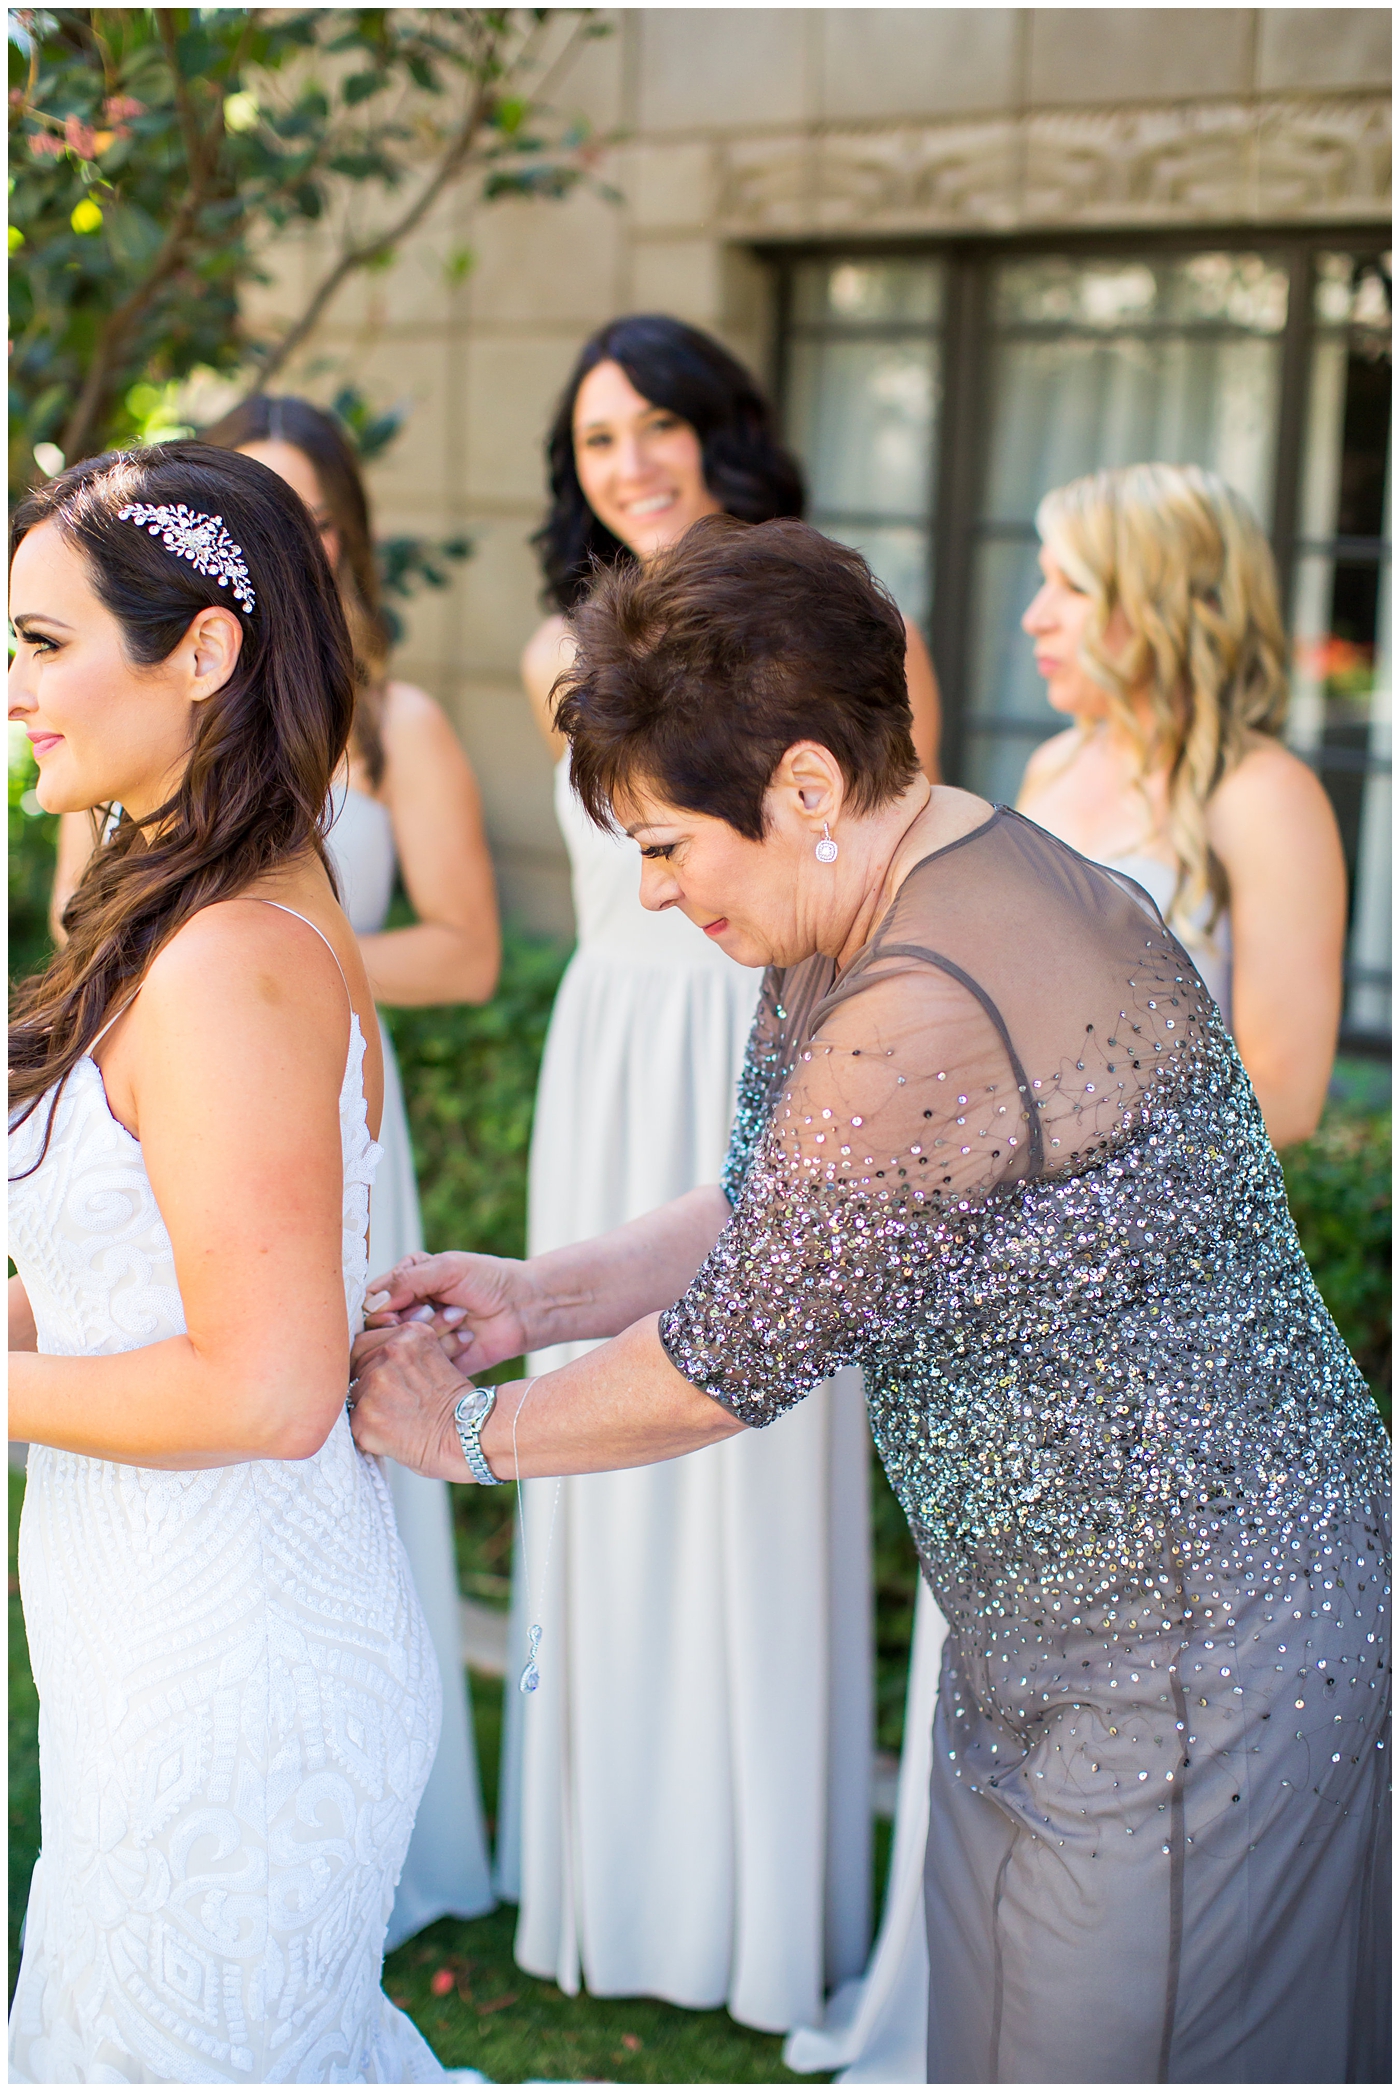 bride in dress with thin straps getting ready with bridesmaids in champagne color dresses